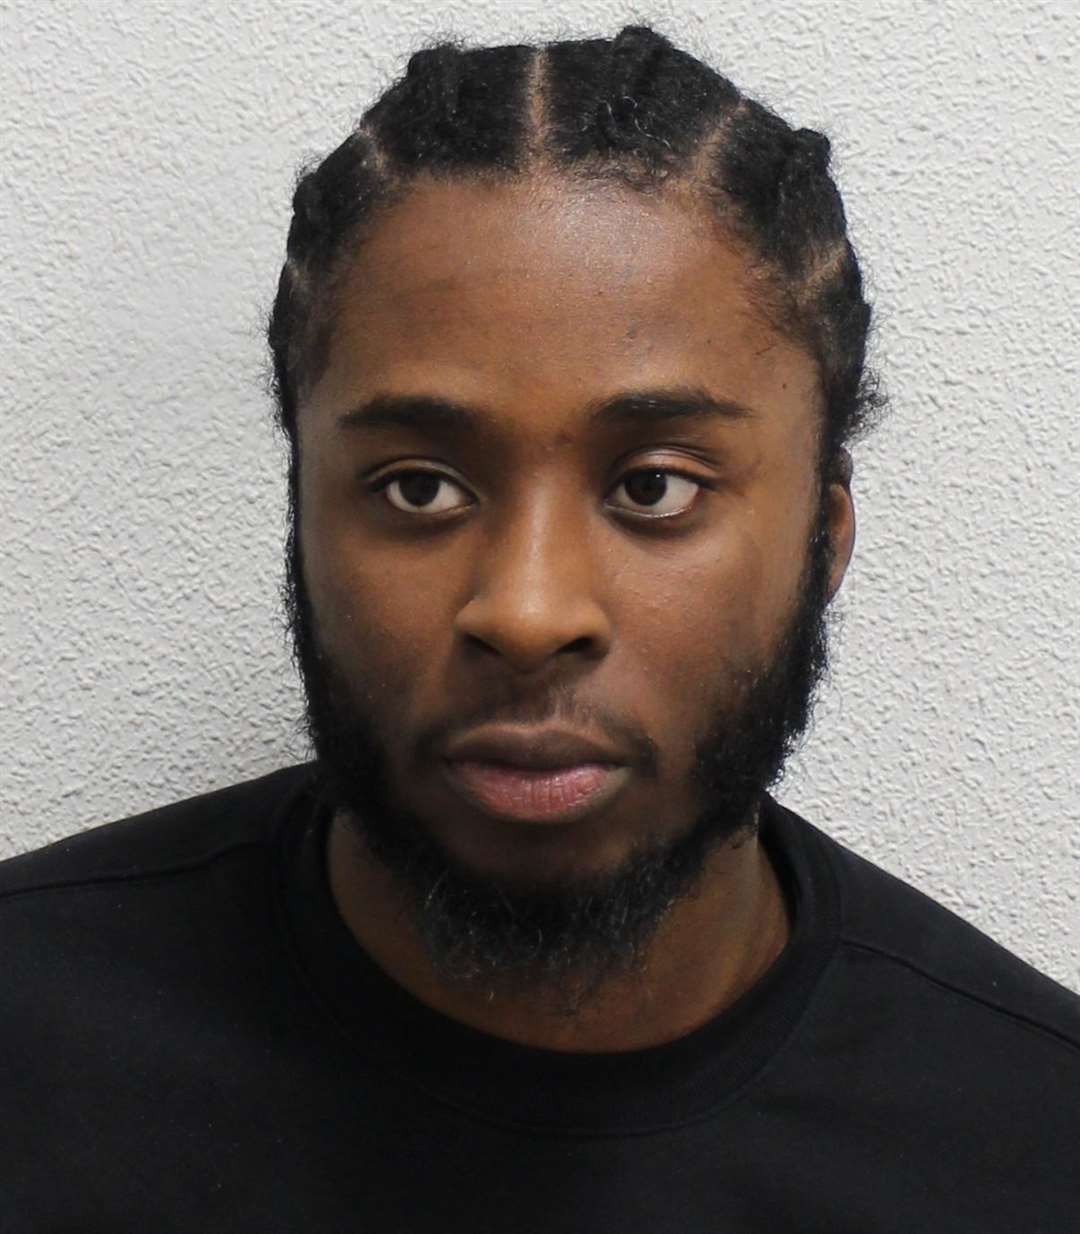 Donald Owusu, 25, of no fixed address, was also found guilty of the murder of 33-year-old Albert Amofa following a trial at the Old Bailey